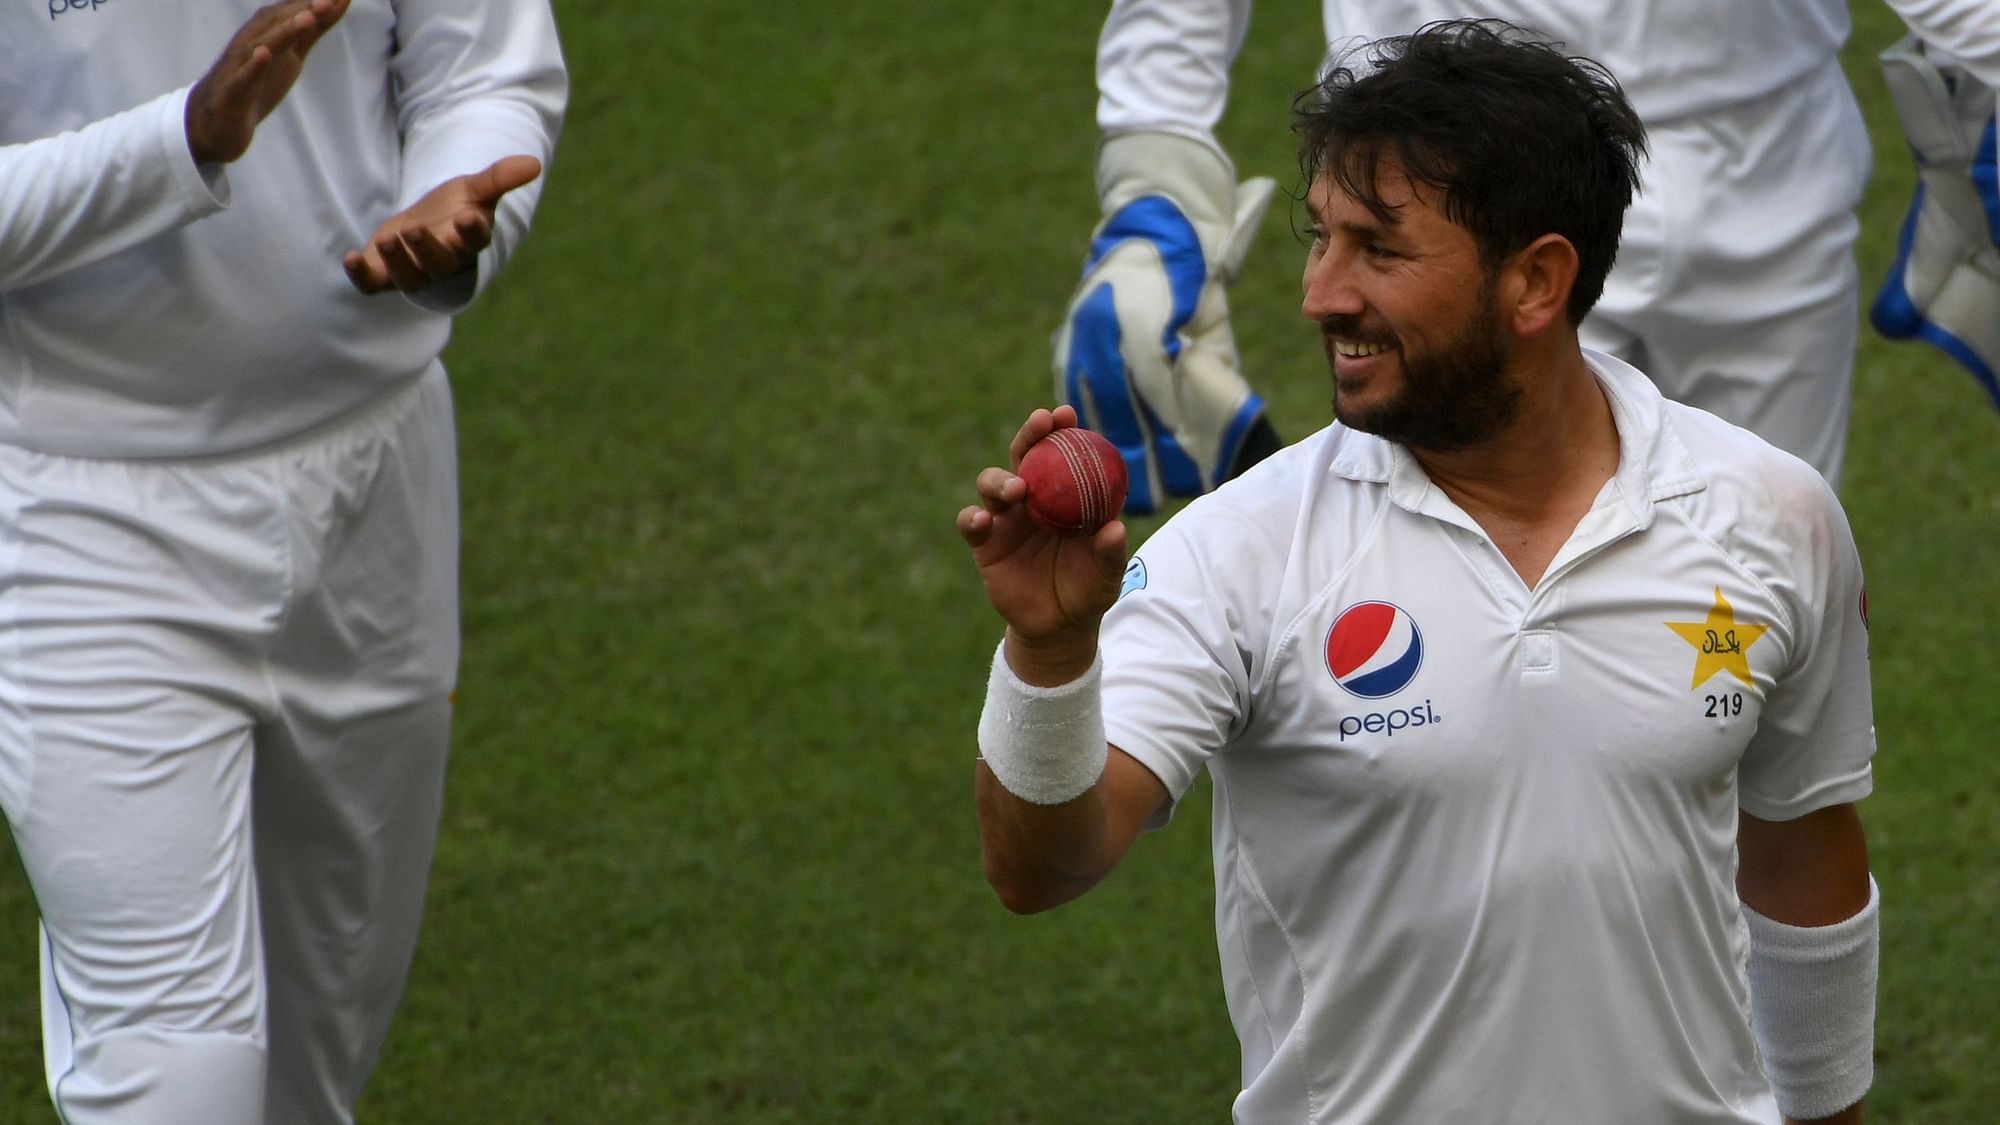 Yasir Shah claimed 8/41 in New Zealand’s first innings, the third-best figures for a Pakistan bowler in Test history